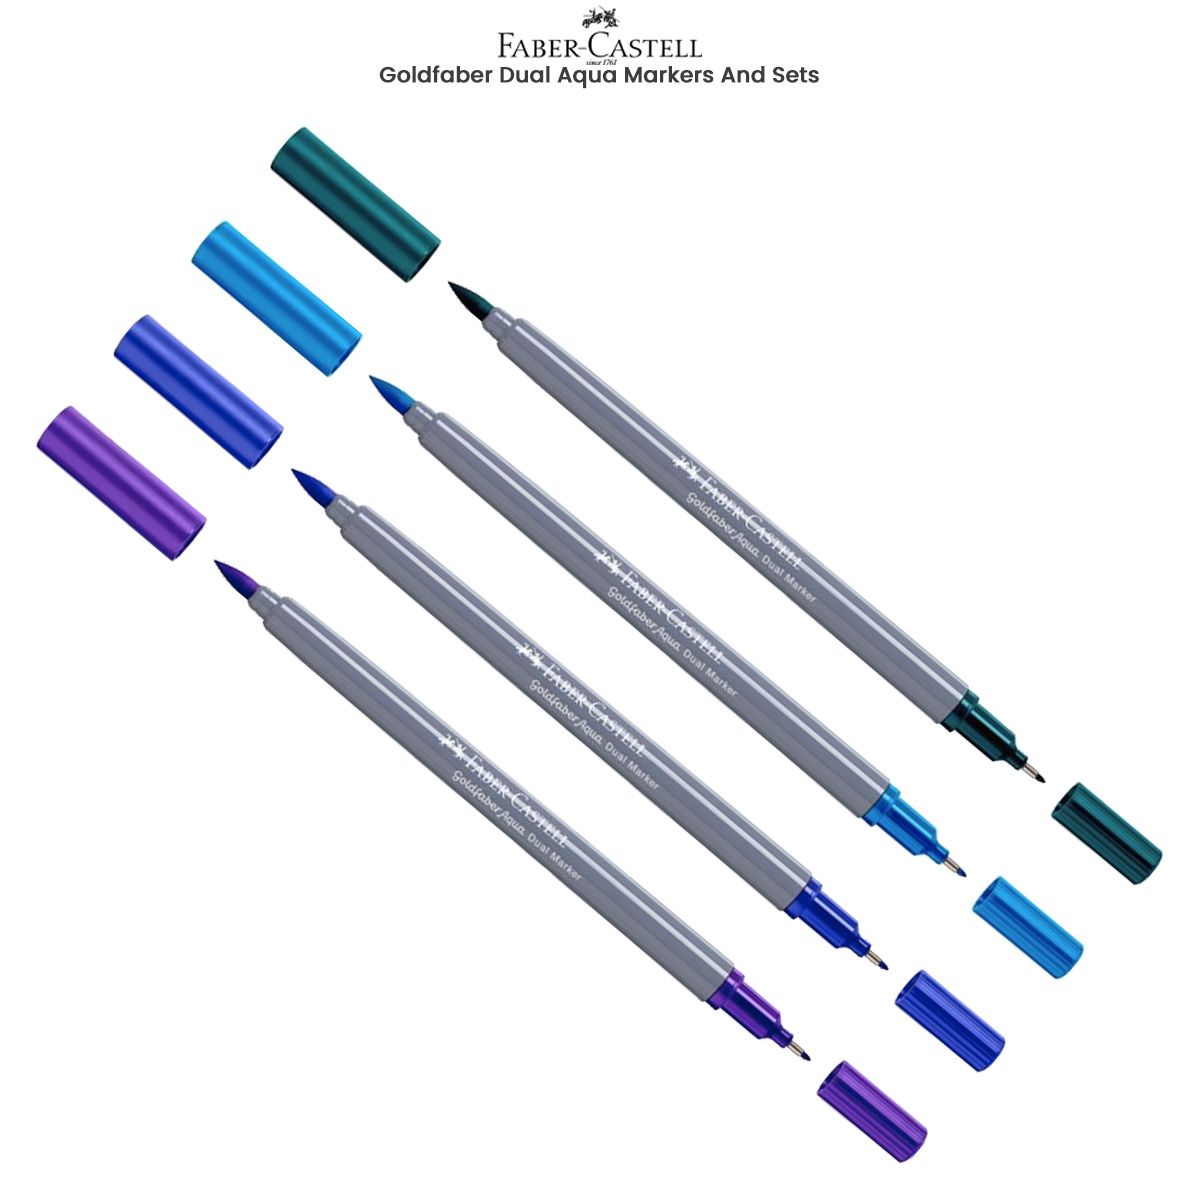 Faber-Castell Goldfaber Aqua Dual Markers Open Stock And Sets